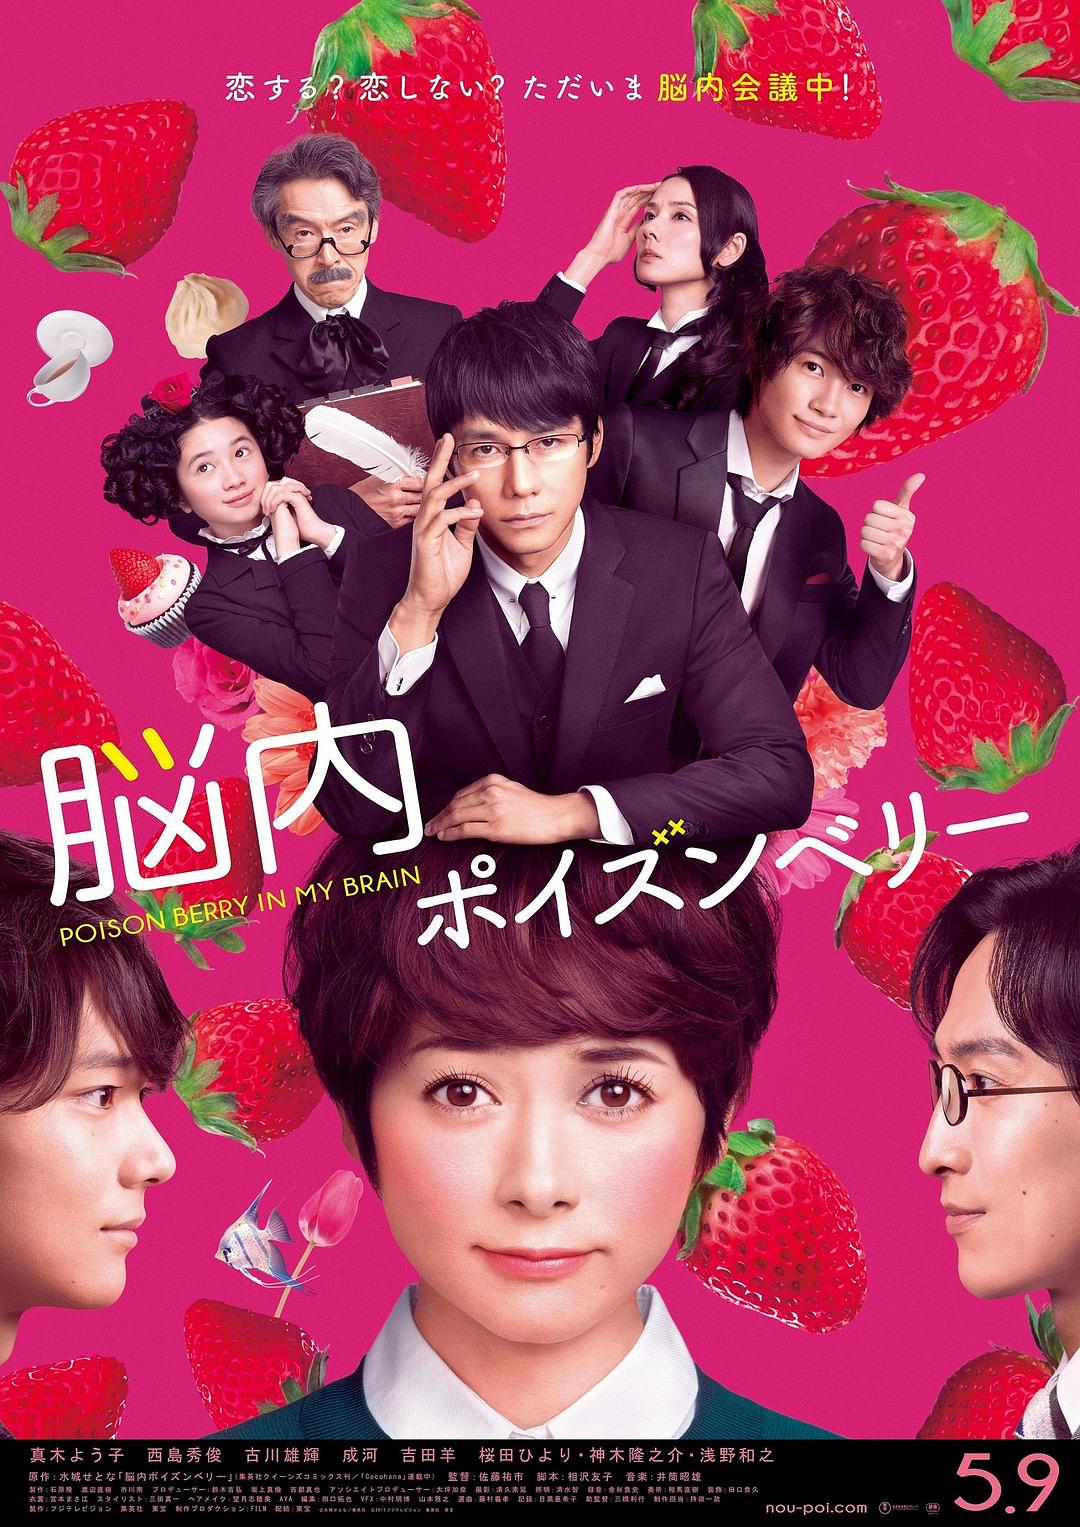 жս Poison.Berry.in.My.Brain.2015.JAPANESE.1080p.BluRay.x264.DTS-WiKi 12.00G-1.png